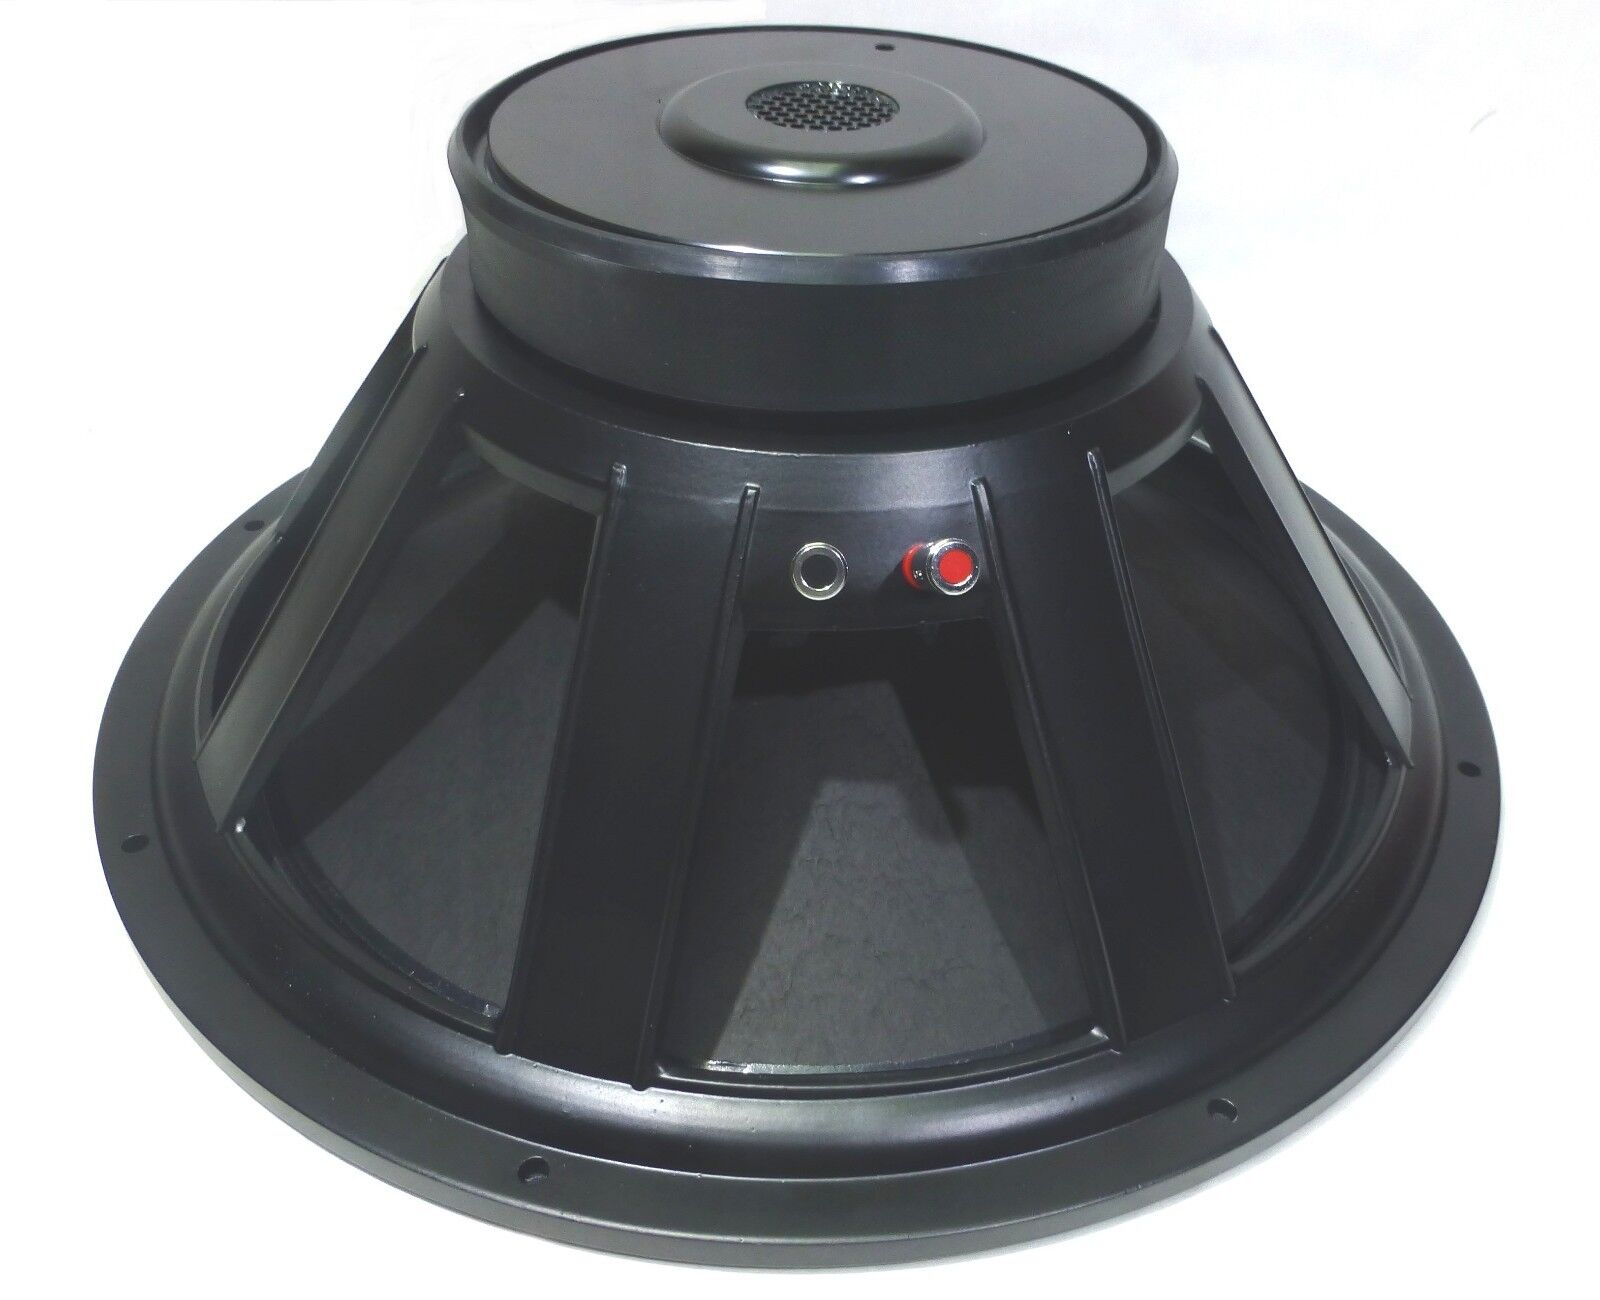 LASE Replacement 18" Speaker for Mackie SRM-1801 / SRM-1850